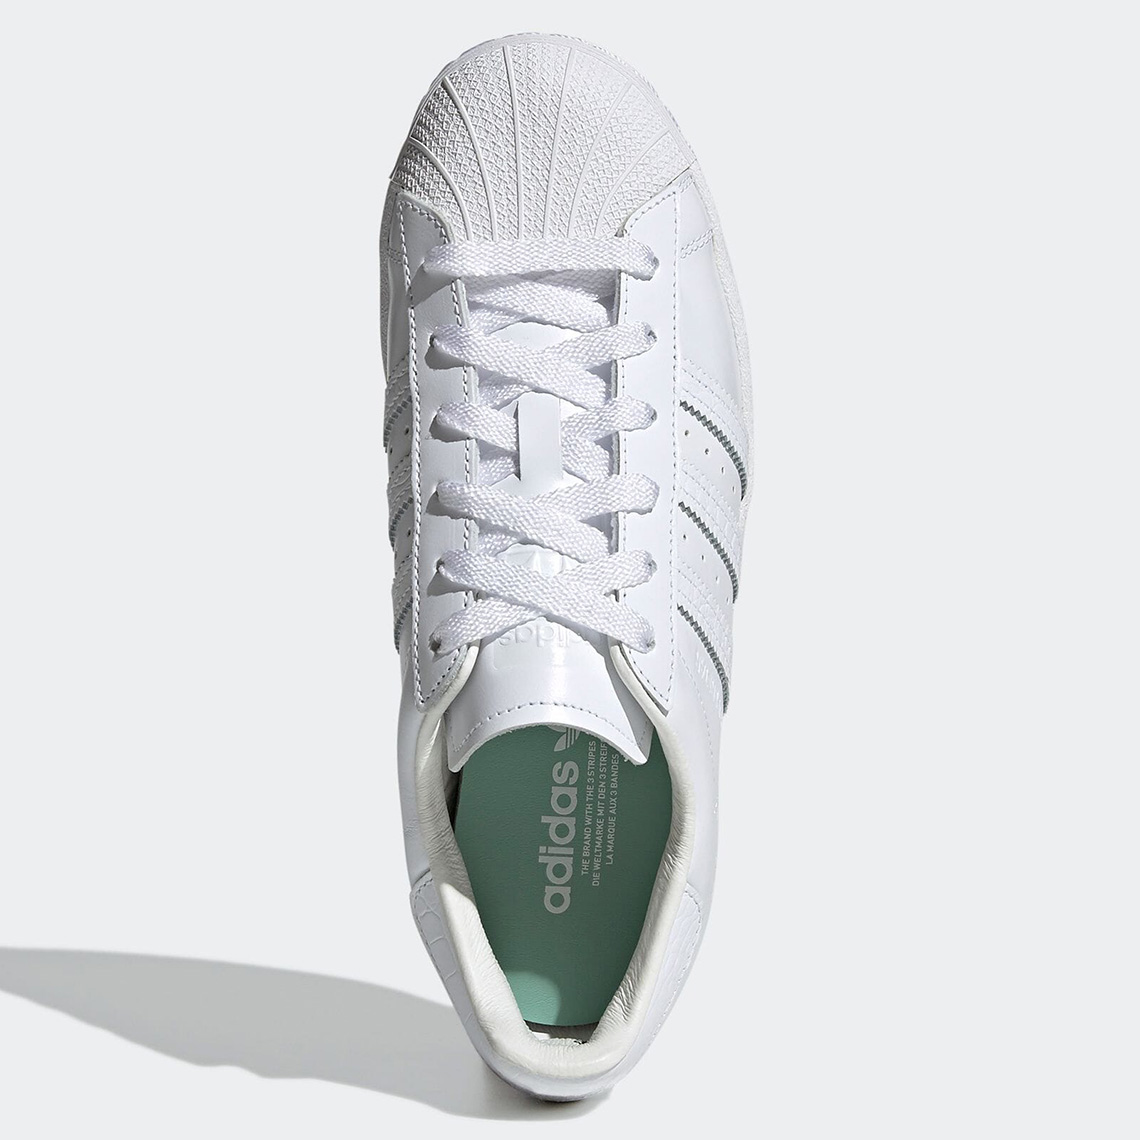 BEAMS Brings All-White Premium Leather And Croc To The adidas Superstar ...